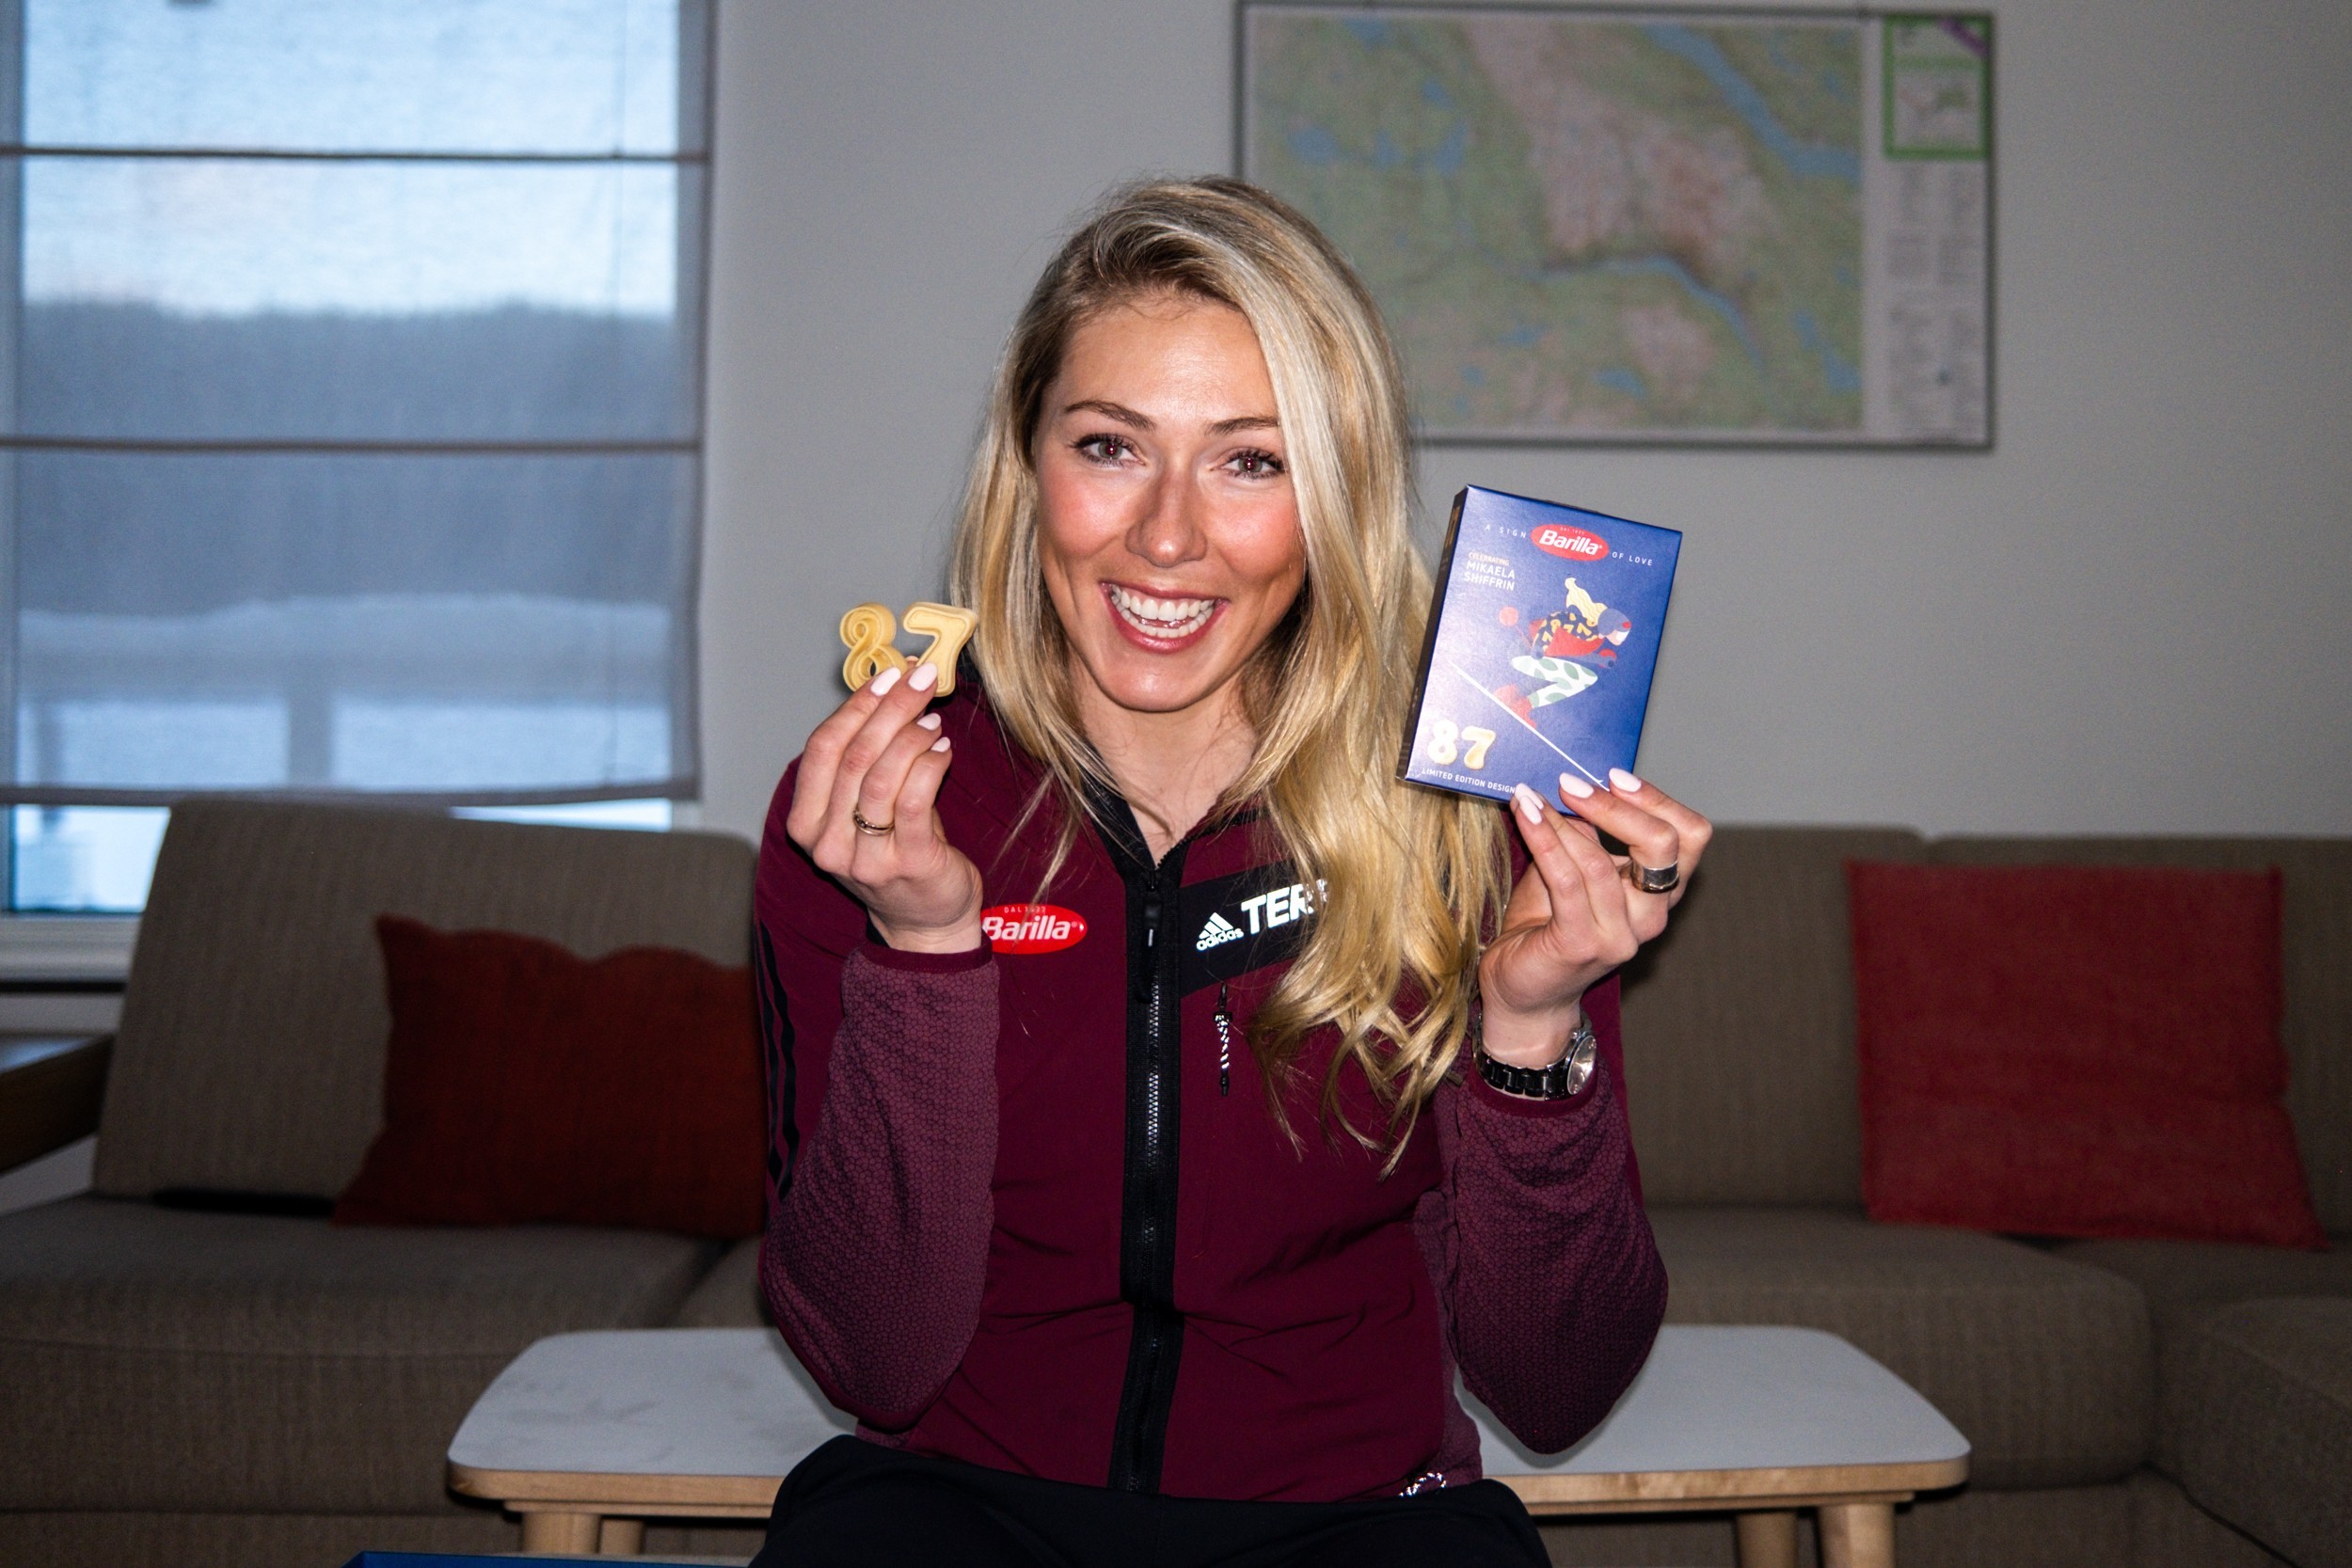 Barilla & Mikaela Shiffrin: Greatness starts with a great recipe - Pack No. 41